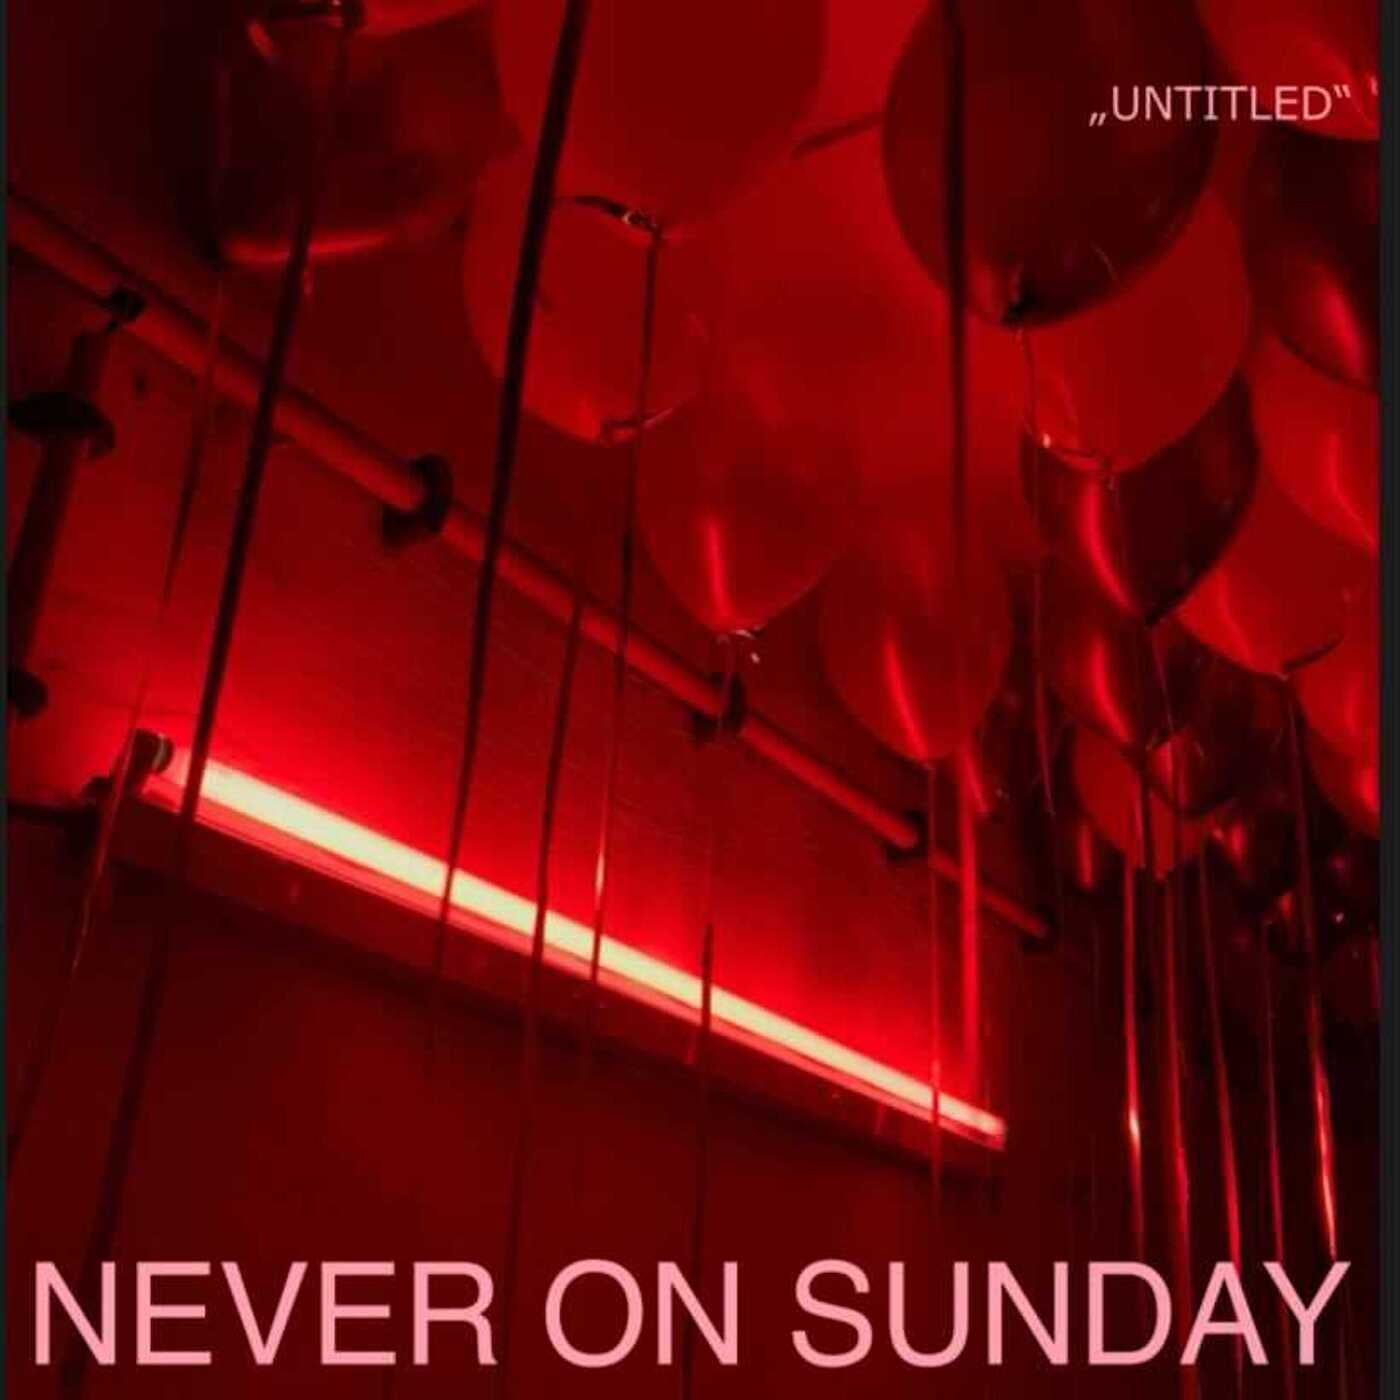 image cover: Octave One presents Never On Sunday - The Bearer featuring Karina Mia - Remixes / 4WDG750